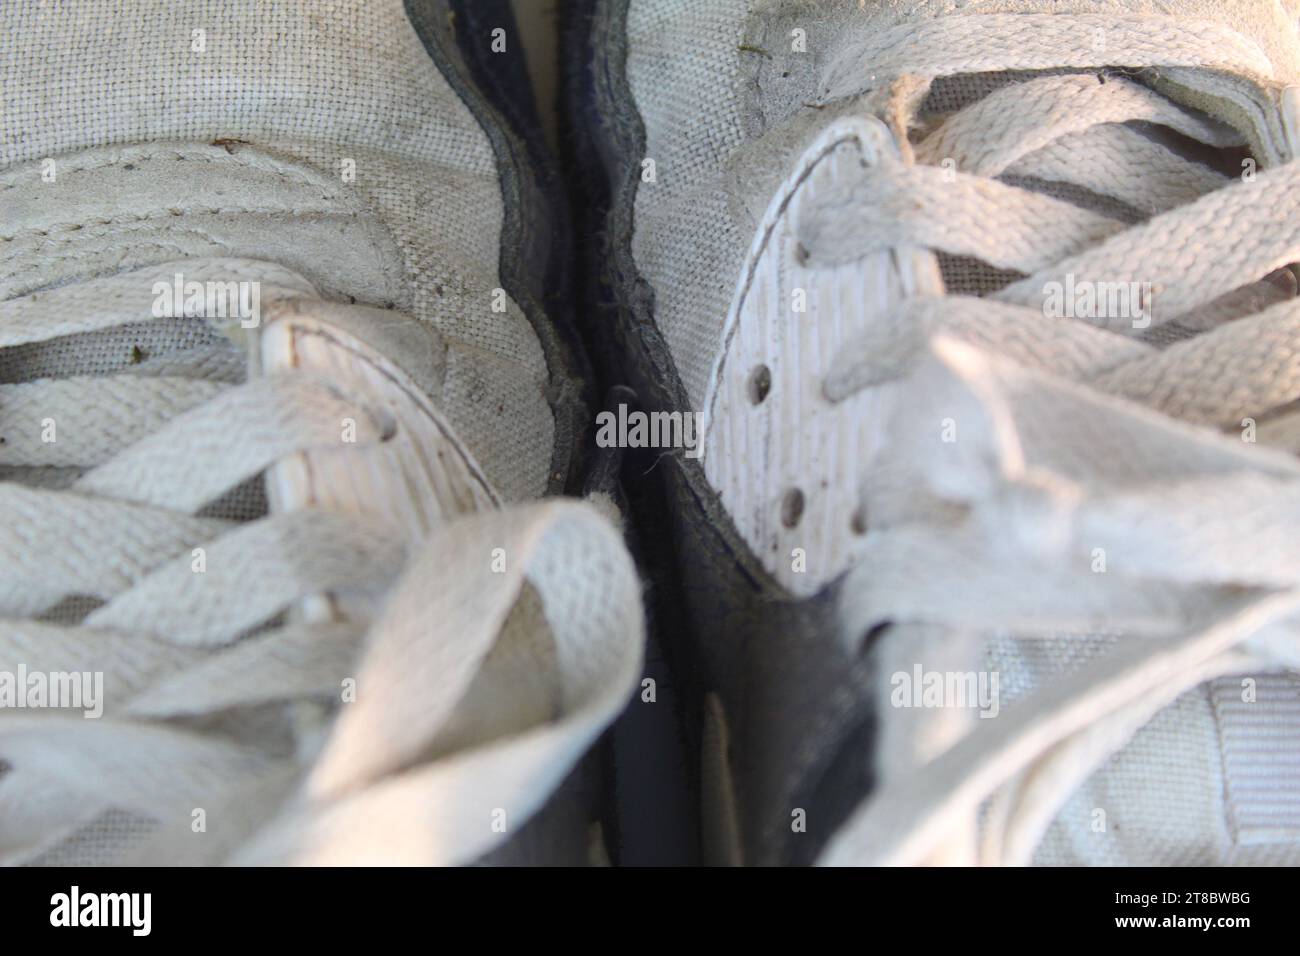 A close up photo of the shoelaces of white dirty Nike Air Max 90 Runners on a white desk. Stock Photo